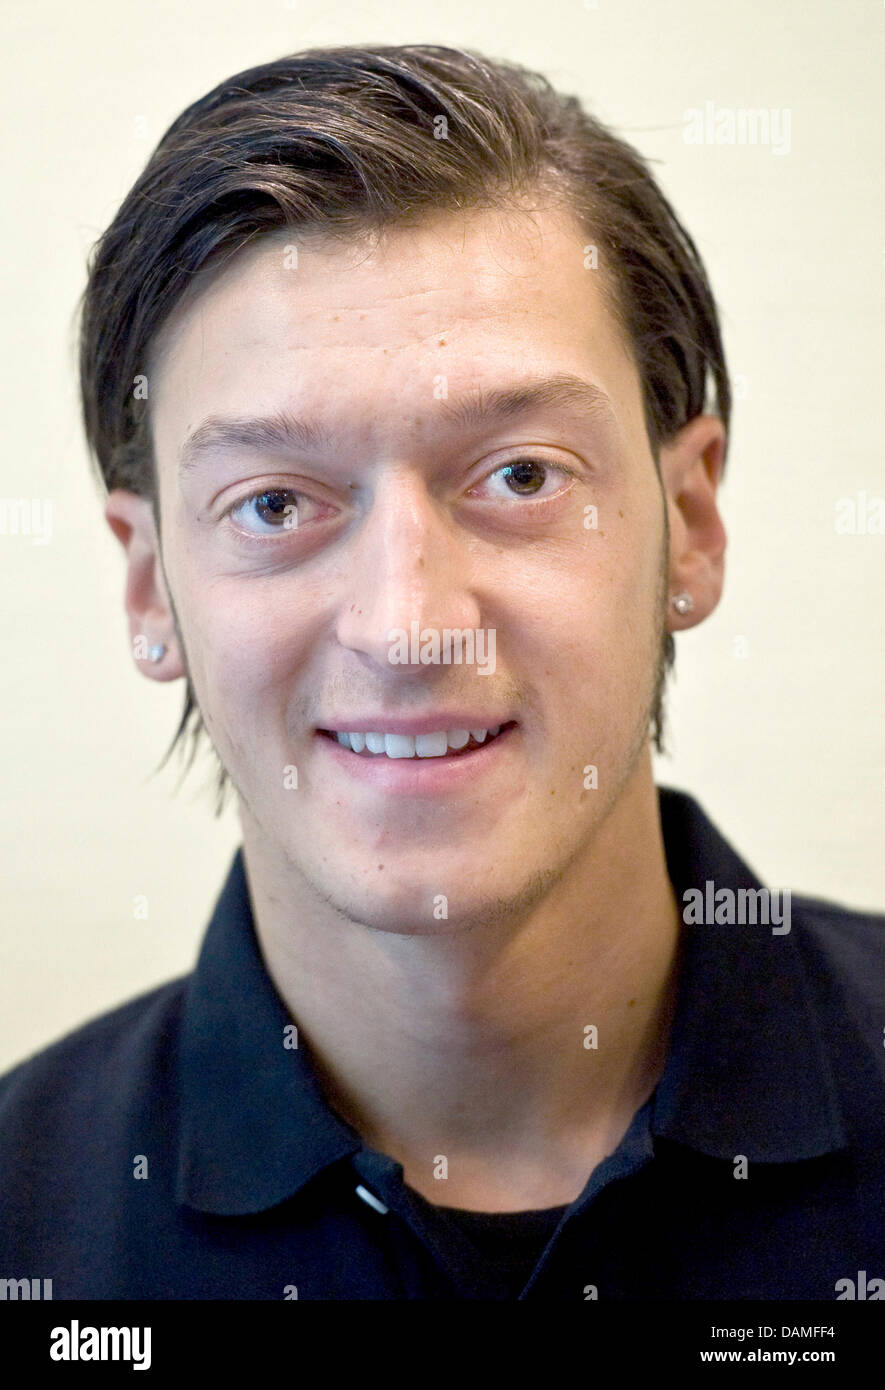 German national team soccer player, Mesut Oezil, smiles a press conference of German Railways (DB) subsidiary 'DB Services' in Duesseldorf, Germany, 10 June 2011. The soccer player and subsidiary company of German Railways (Deutsch Bahn), 'DB Services', are starting the model project 'DB Services Zukunfts-Camp - Kick Dich in Deine Berufliche Zukunft' (DB Services Future Camp - Kick Stock Photo